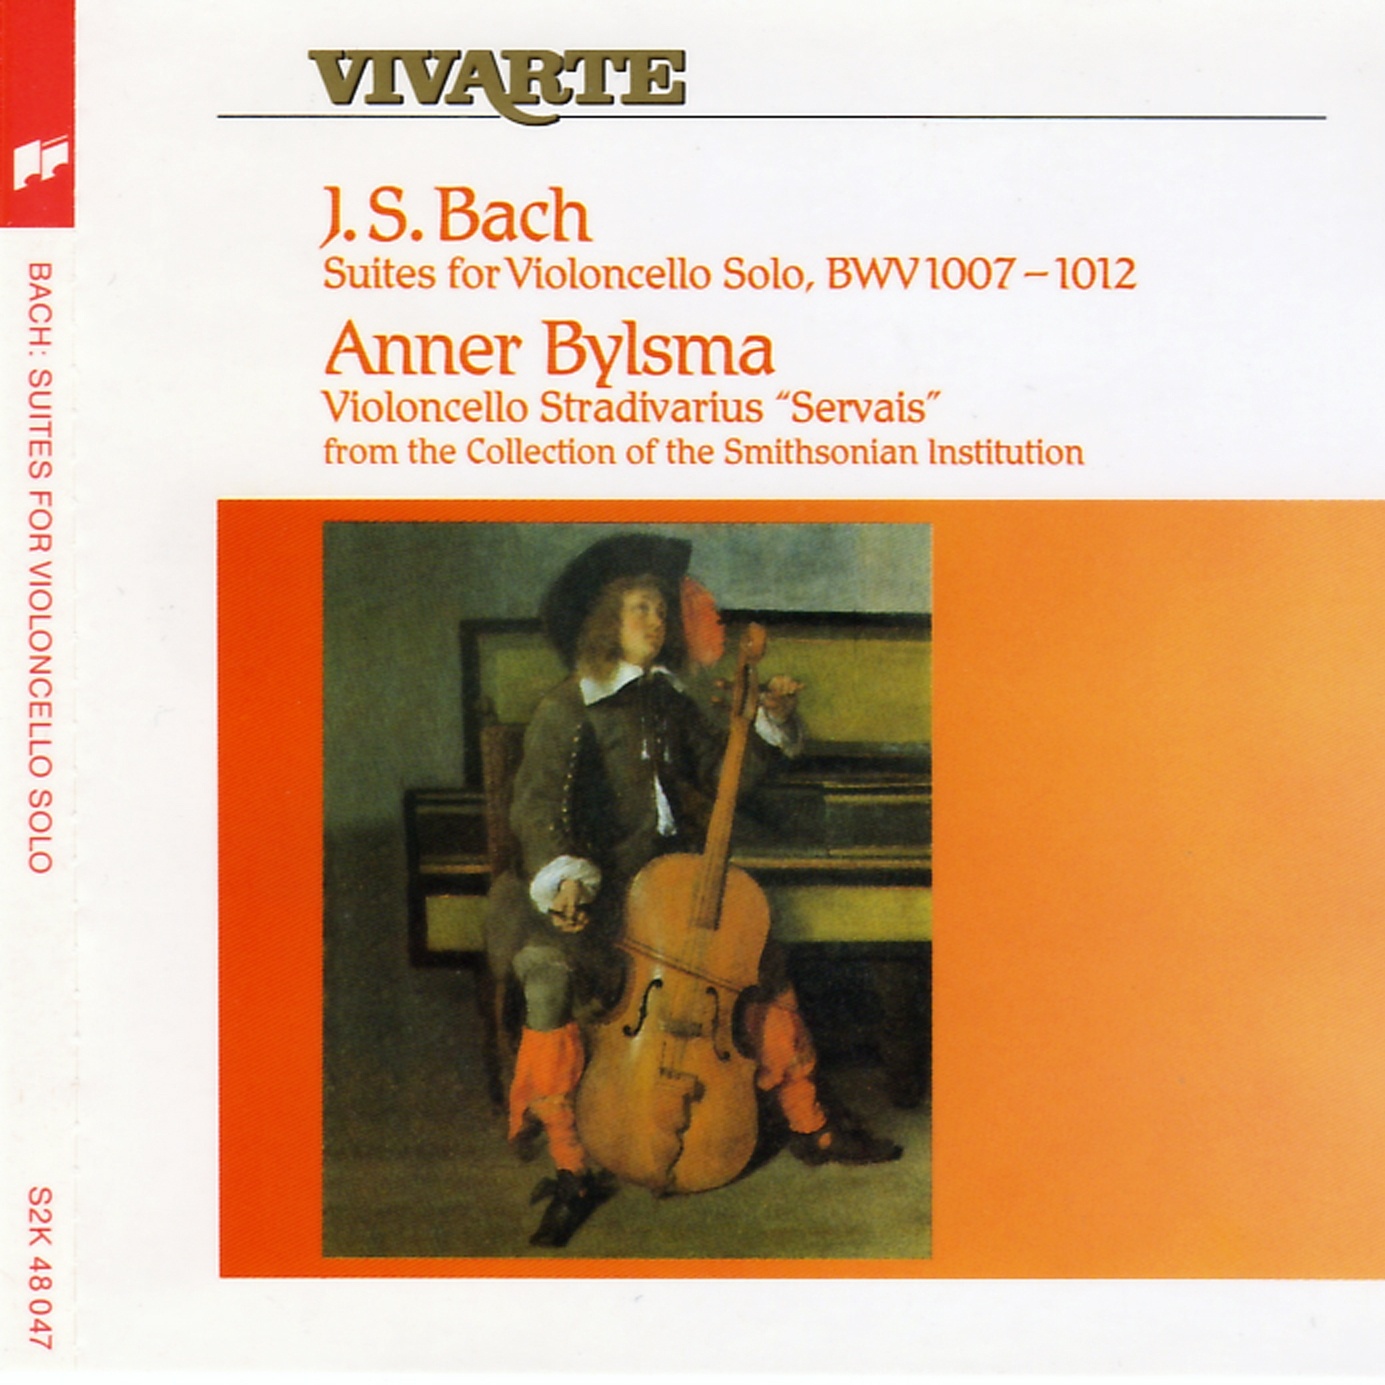 J.S.Bach: 6 Suites for Cello, BWV 1007-1012